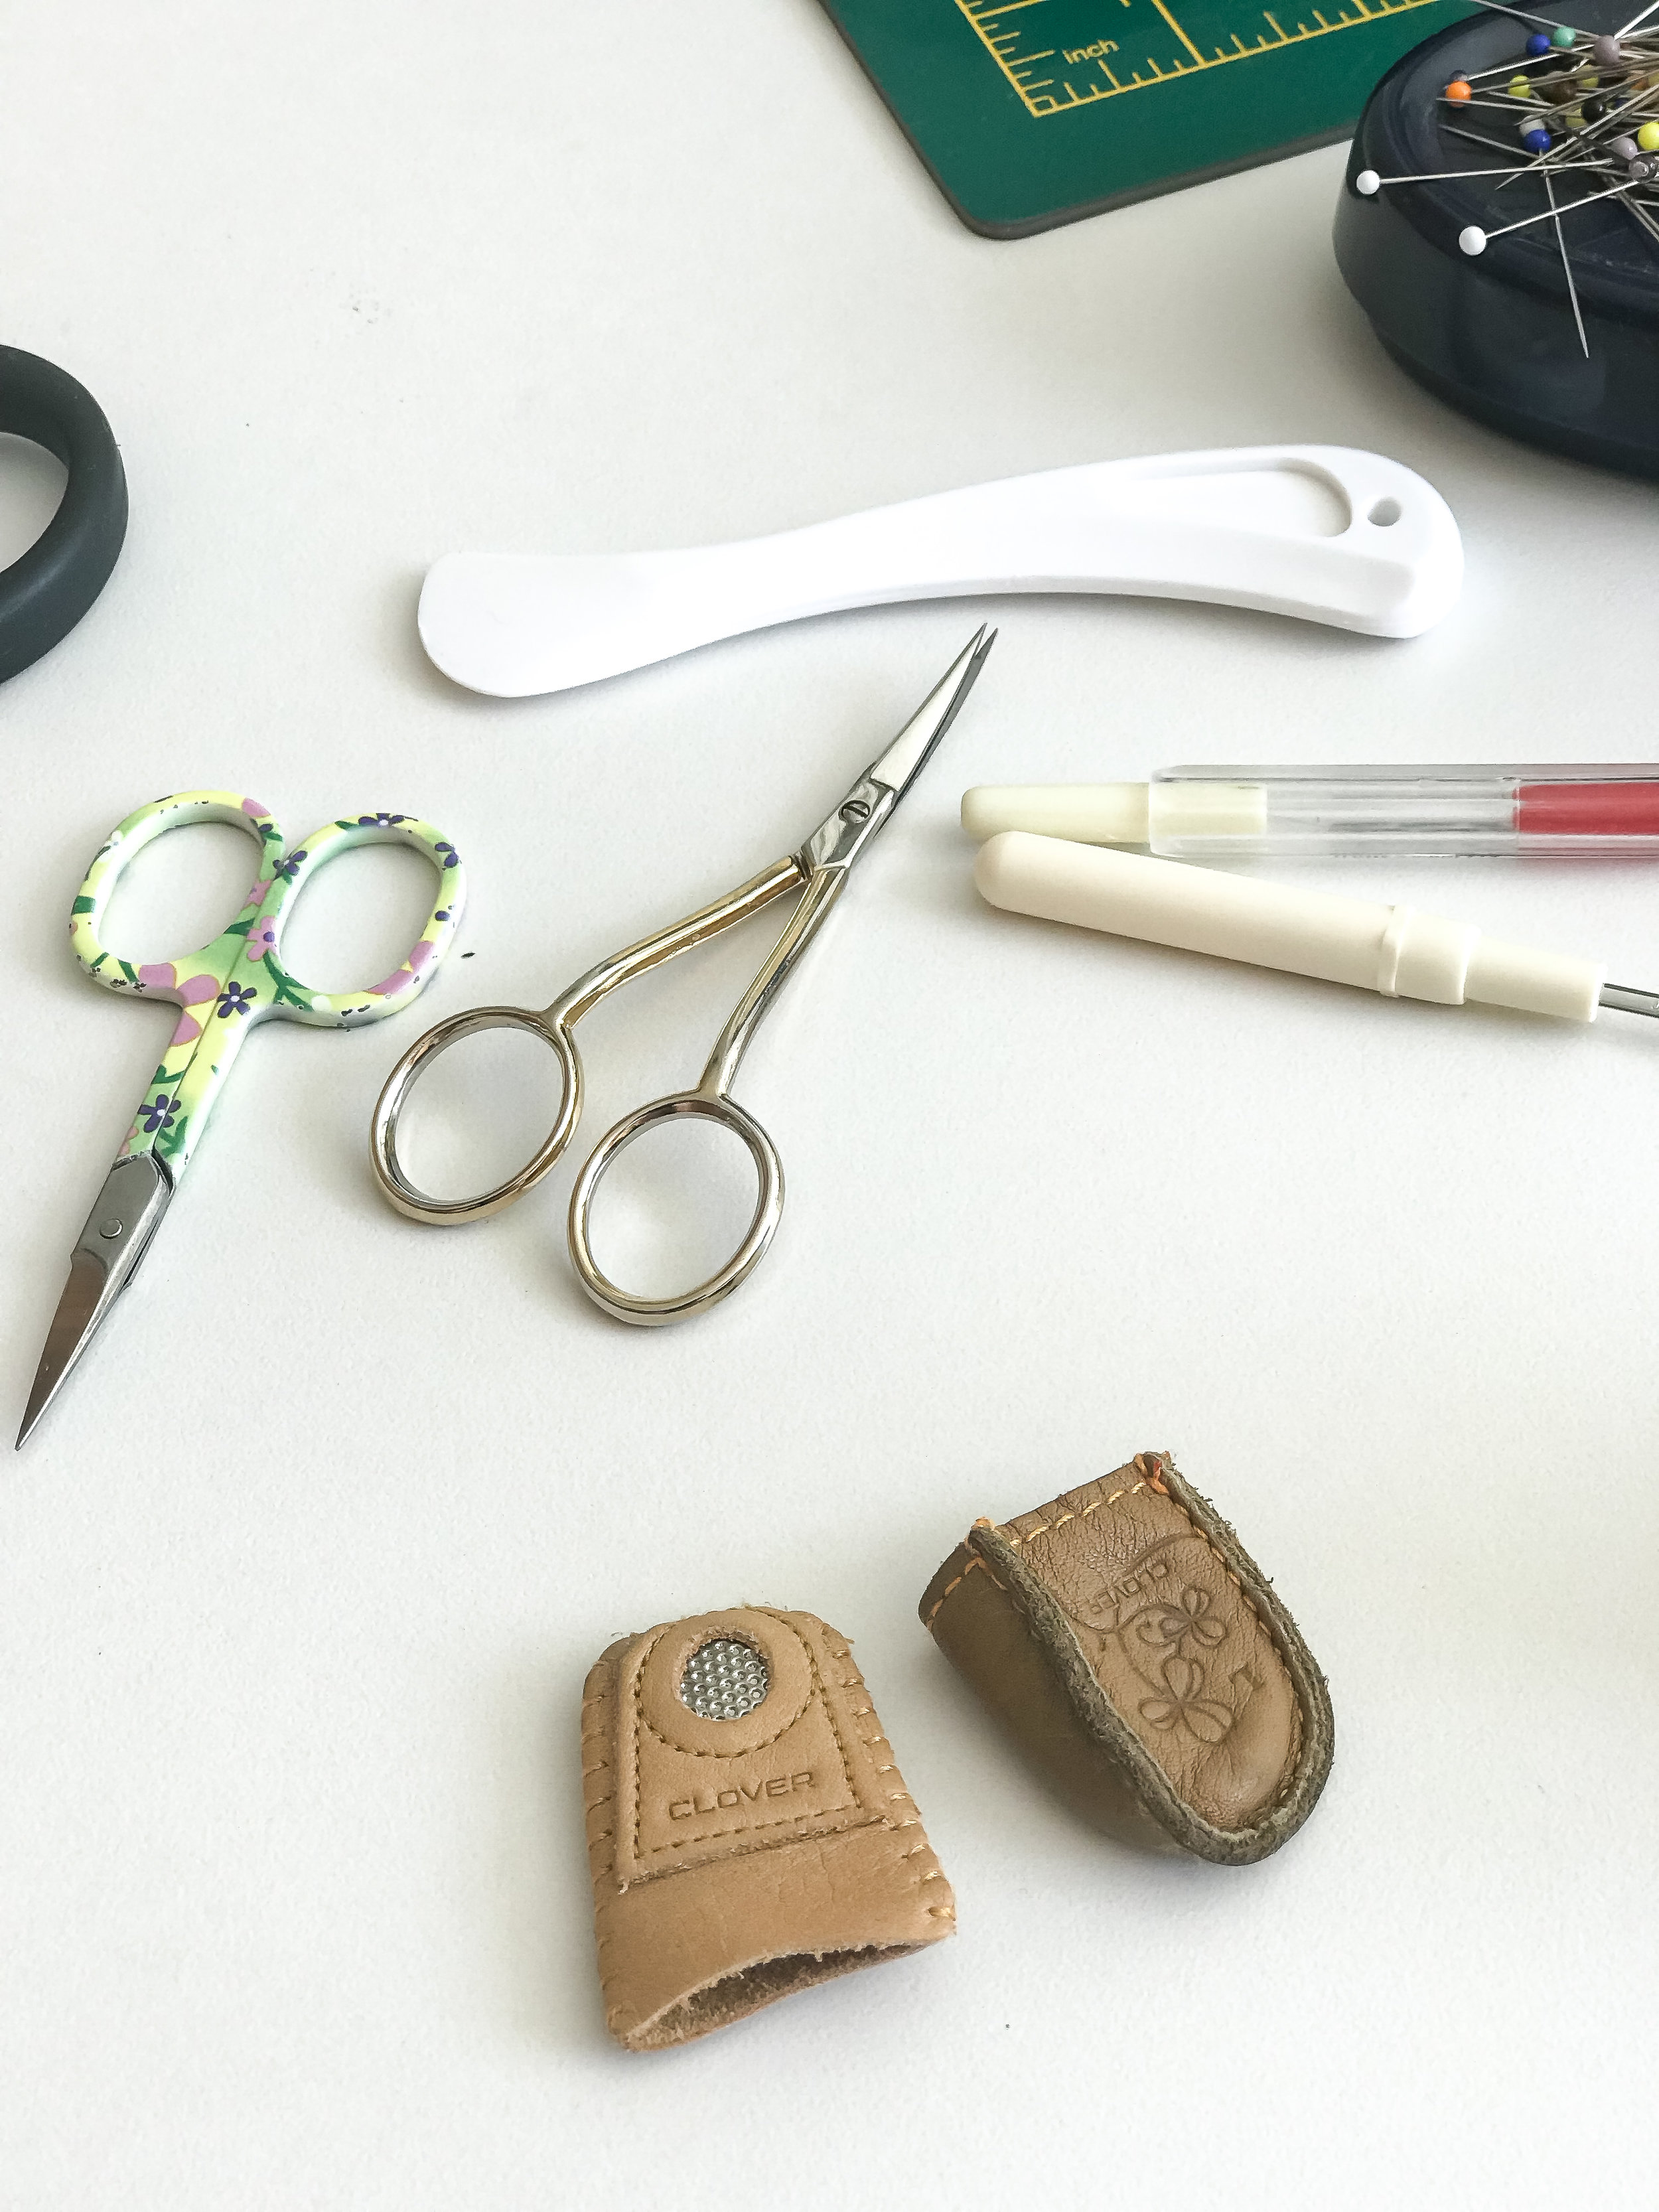 Do You Have These 20 Essential Sewing Tools? Part 2.